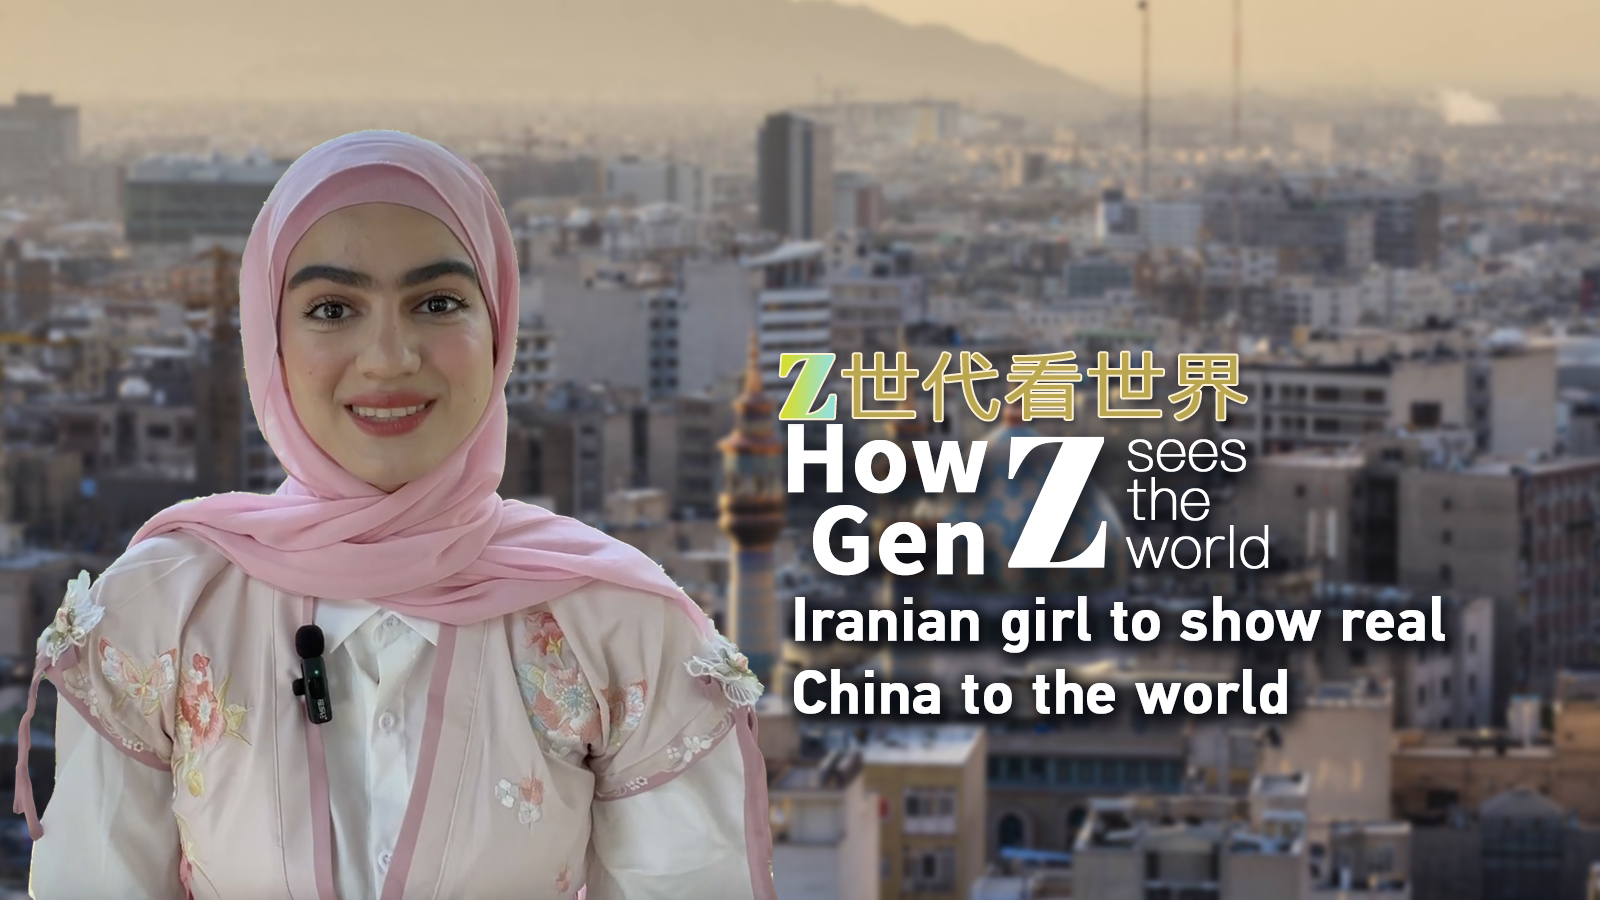 How Gen Z sees the world: Iranian girl to show real China to the world